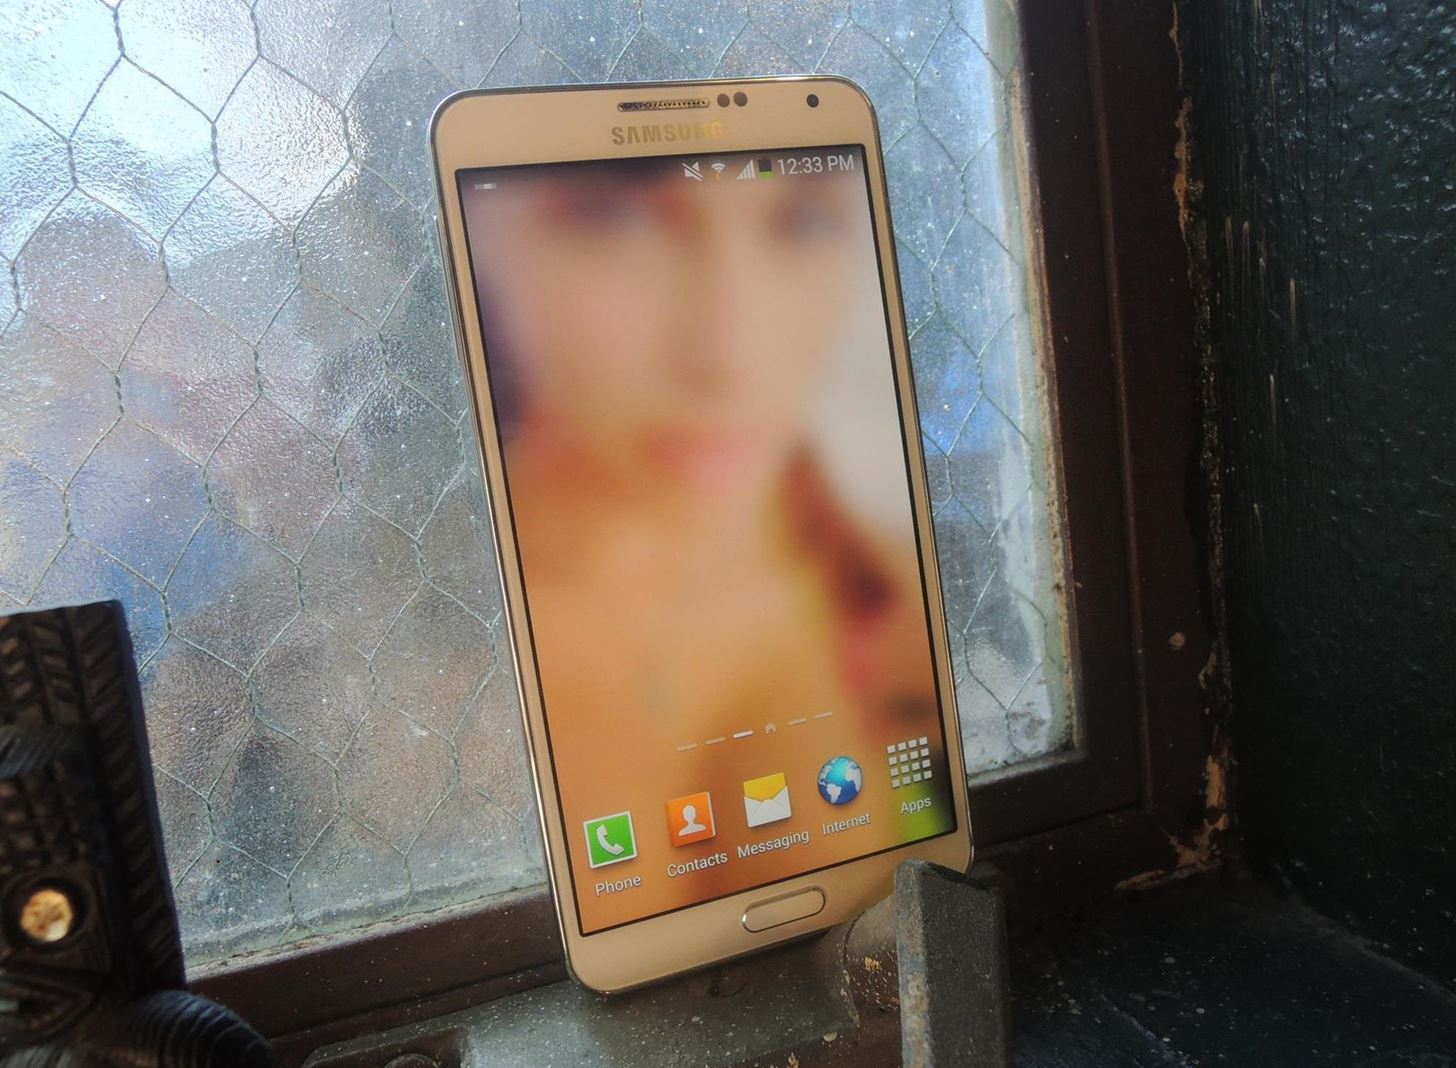 How to Add iOS 7-Style Blur Effects to Backgrounds on Your Samsung Galaxy Note 3